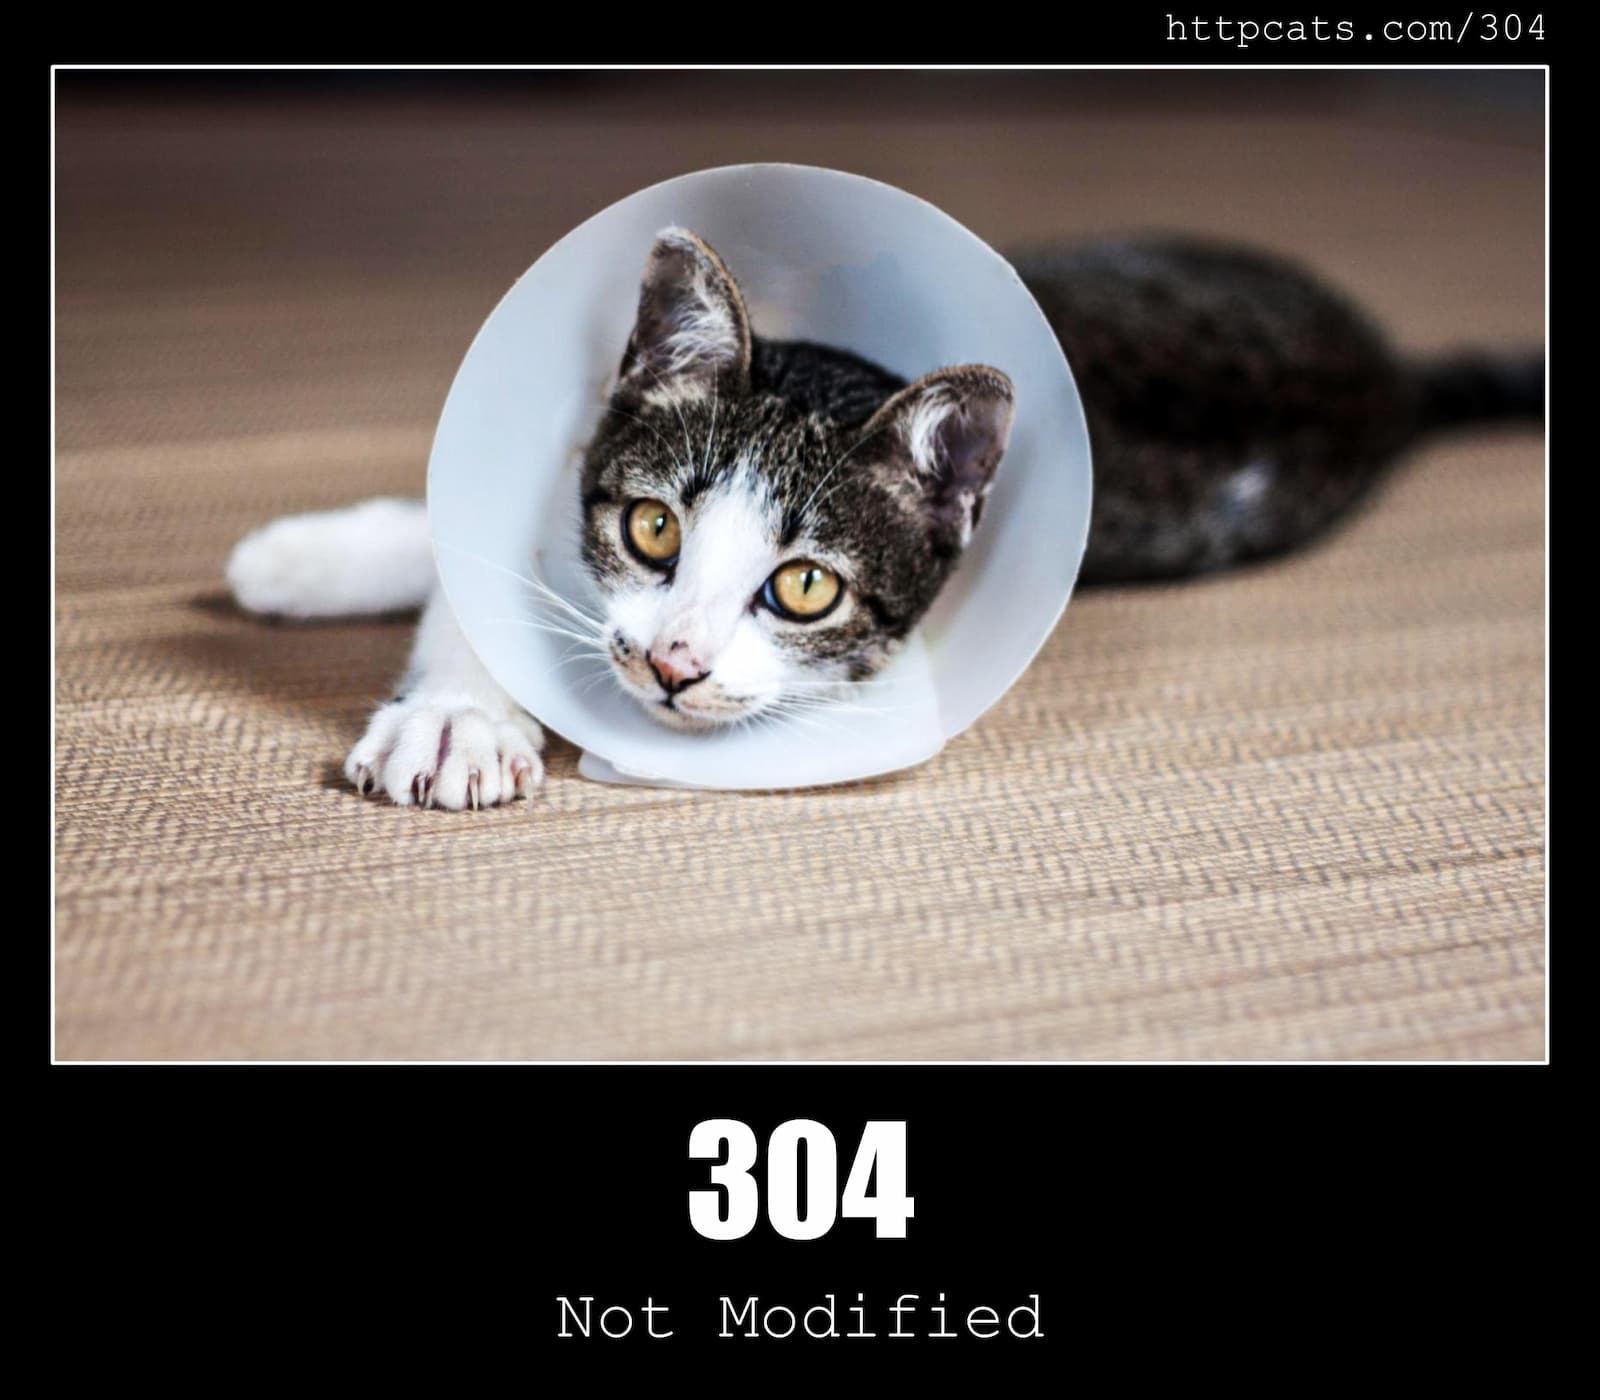 HTTP Status Code 304 Not Modified & Cats